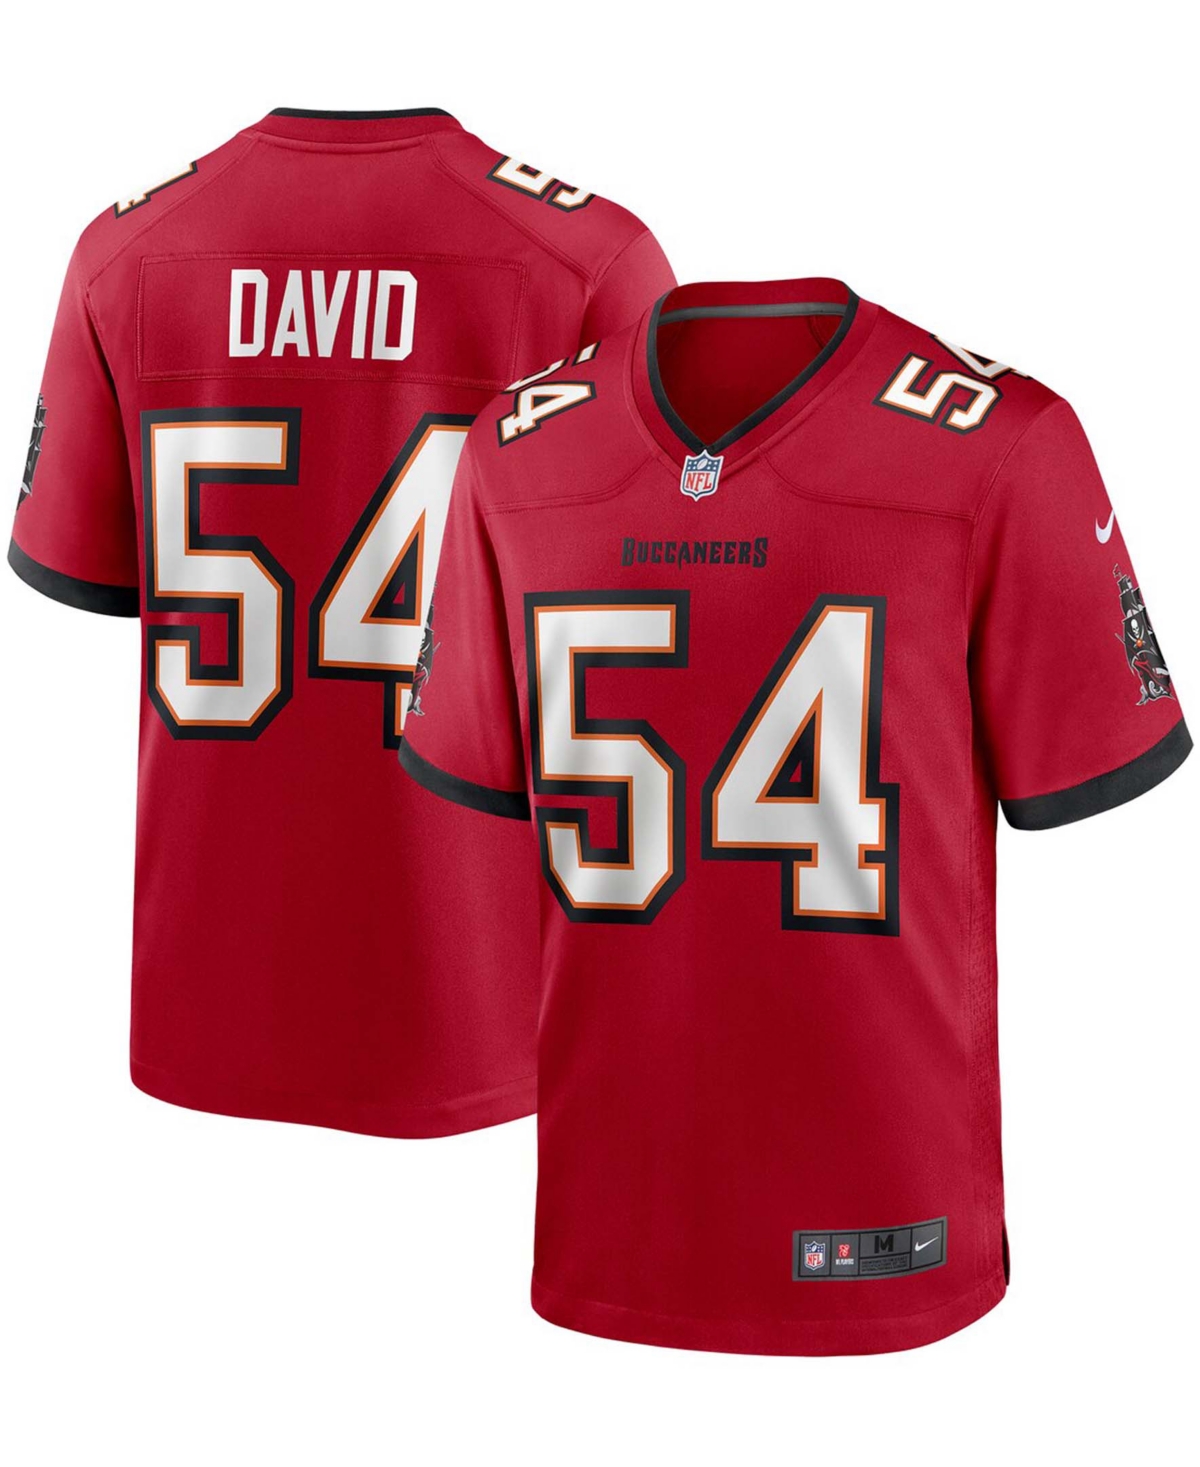 UPC 194534309859 product image for Nike Men's Lavonte David Tampa Bay Buccaneers Player Game Jersey | upcitemdb.com